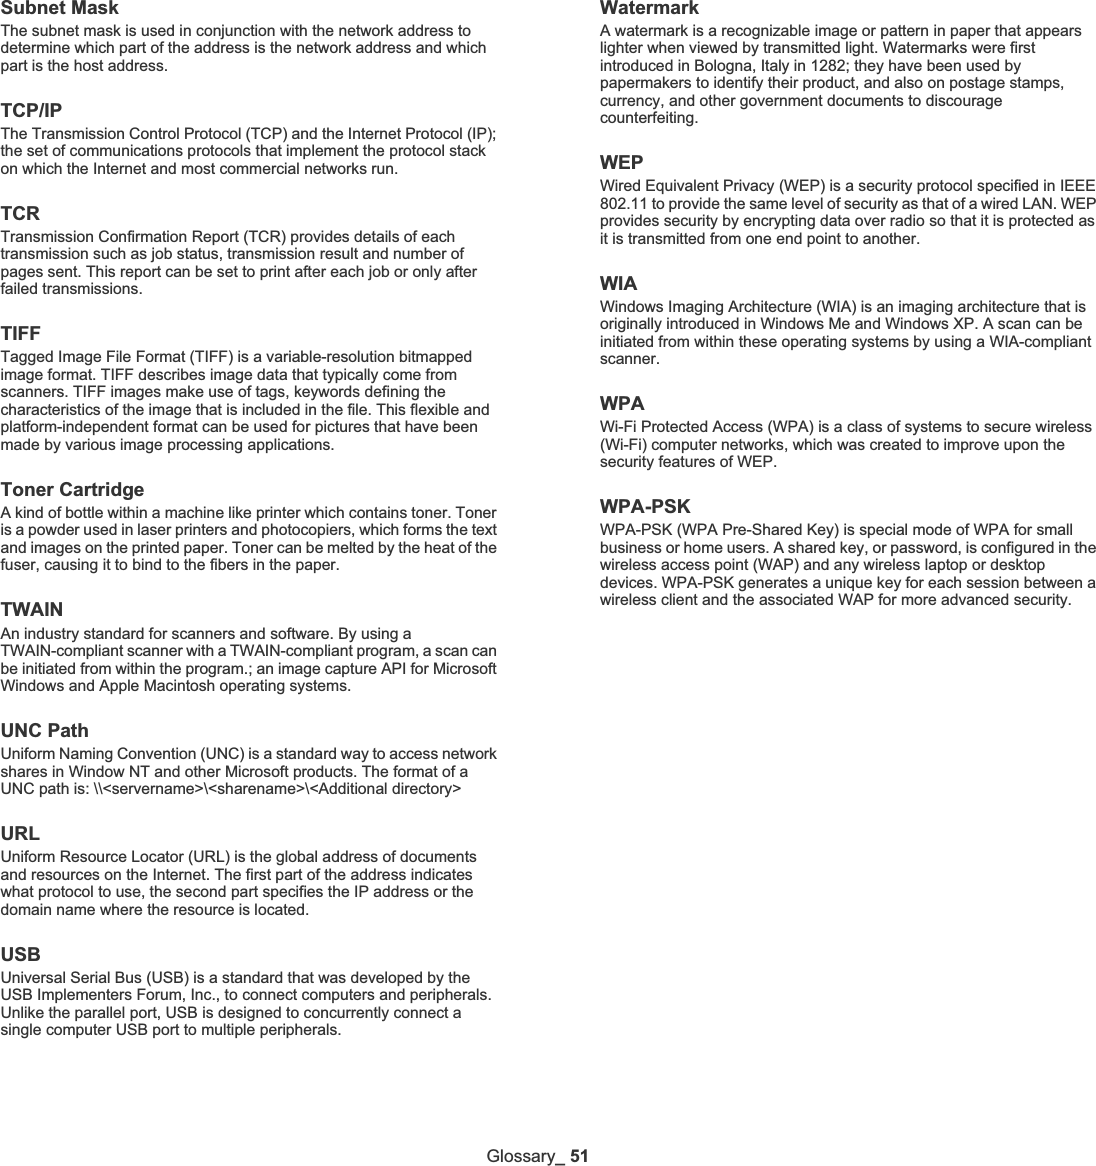 Glossary_51Subnet Mask The subnet mask is used in conjunction with the network address to determine which part of the address is the network address and which part is the host address.TCP/IPThe Transmission Control Protocol (TCP) and the Internet Protocol (IP); the set of communications protocols that implement the protocol stack on which the Internet and most commercial networks run.TCRTransmission Confirmation Report (TCR) provides details of each transmission such as job status, transmission result and number of pages sent. This report can be set to print after each job or only after failed transmissions.TIFFTagged Image File Format (TIFF) is a variable-resolution bitmapped image format. TIFF describes image data that typically come from scanners. TIFF images make use of tags, keywords defining the characteristics of the image that is included in the file. This flexible and platform-independent format can be used for pictures that have been made by various image processing applications.Toner CartridgeA kind of bottle within a machine like printer which contains toner. Toner is a powder used in laser printers and photocopiers, which forms the text and images on the printed paper. Toner can be melted by the heat of the fuser, causing it to bind to the fibers in the paper.TWAINAn industry standard for scanners and software. By using a TWAIN-compliant scanner with a TWAIN-compliant program, a scan can be initiated from within the program.; an image capture API for Microsoft Windows and Apple Macintosh operating systems.UNC PathUniform Naming Convention (UNC) is a standard way to access network shares in Window NT and other Microsoft products. The format of a UNC path is: \\&lt;servername&gt;\&lt;sharename&gt;\&lt;Additional directory&gt;URLUniform Resource Locator (URL) is the global address of documents and resources on the Internet. The first part of the address indicates what protocol to use, the second part specifies the IP address or the domain name where the resource is located.USBUniversal Serial Bus (USB) is a standard that was developed by the USB Implementers Forum, Inc., to connect computers and peripherals. Unlike the parallel port, USB is designed to concurrently connect a single computer USB port to multiple peripherals.WatermarkA watermark is a recognizable image or pattern in paper that appears lighter when viewed by transmitted light. Watermarks were first introduced in Bologna, Italy in 1282; they have been used by papermakers to identify their product, and also on postage stamps, currency, and other government documents to discourage counterfeiting.WEPWired Equivalent Privacy (WEP) is a security protocol specified in IEEE 802.11 to provide the same level of security as that of a wired LAN. WEP provides security by encrypting data over radio so that it is protected as it is transmitted from one end point to another.WIAWindows Imaging Architecture (WIA) is an imaging architecture that is originally introduced in Windows Me and Windows XP. A scan can be initiated from within these operating systems by using a WIA-compliant scanner.WPAWi-Fi Protected Access (WPA) is a class of systems to secure wireless (Wi-Fi) computer networks, which was created to improve upon the security features of WEP.WPA-PSKWPA-PSK (WPA Pre-Shared Key) is special mode of WPA for small business or home users. A shared key, or password, is configured in the wireless access point (WAP) and any wireless laptop or desktop devices. WPA-PSK generates a unique key for each session between a wireless client and the associated WAP for more advanced security.